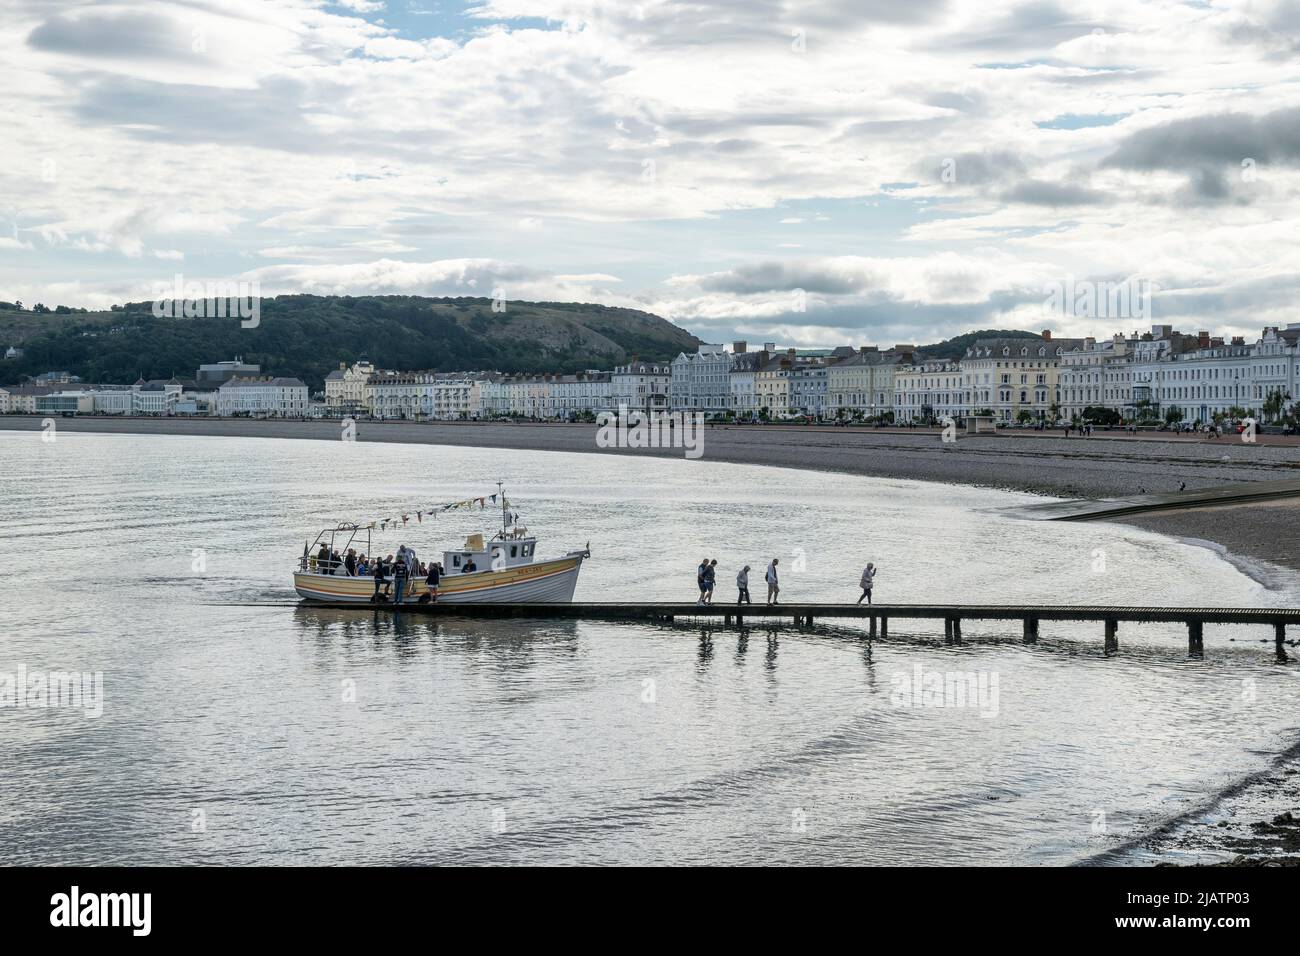 Sight seeing tourist boat trip in Llandudno bay on the North Wales coast Stock Photo